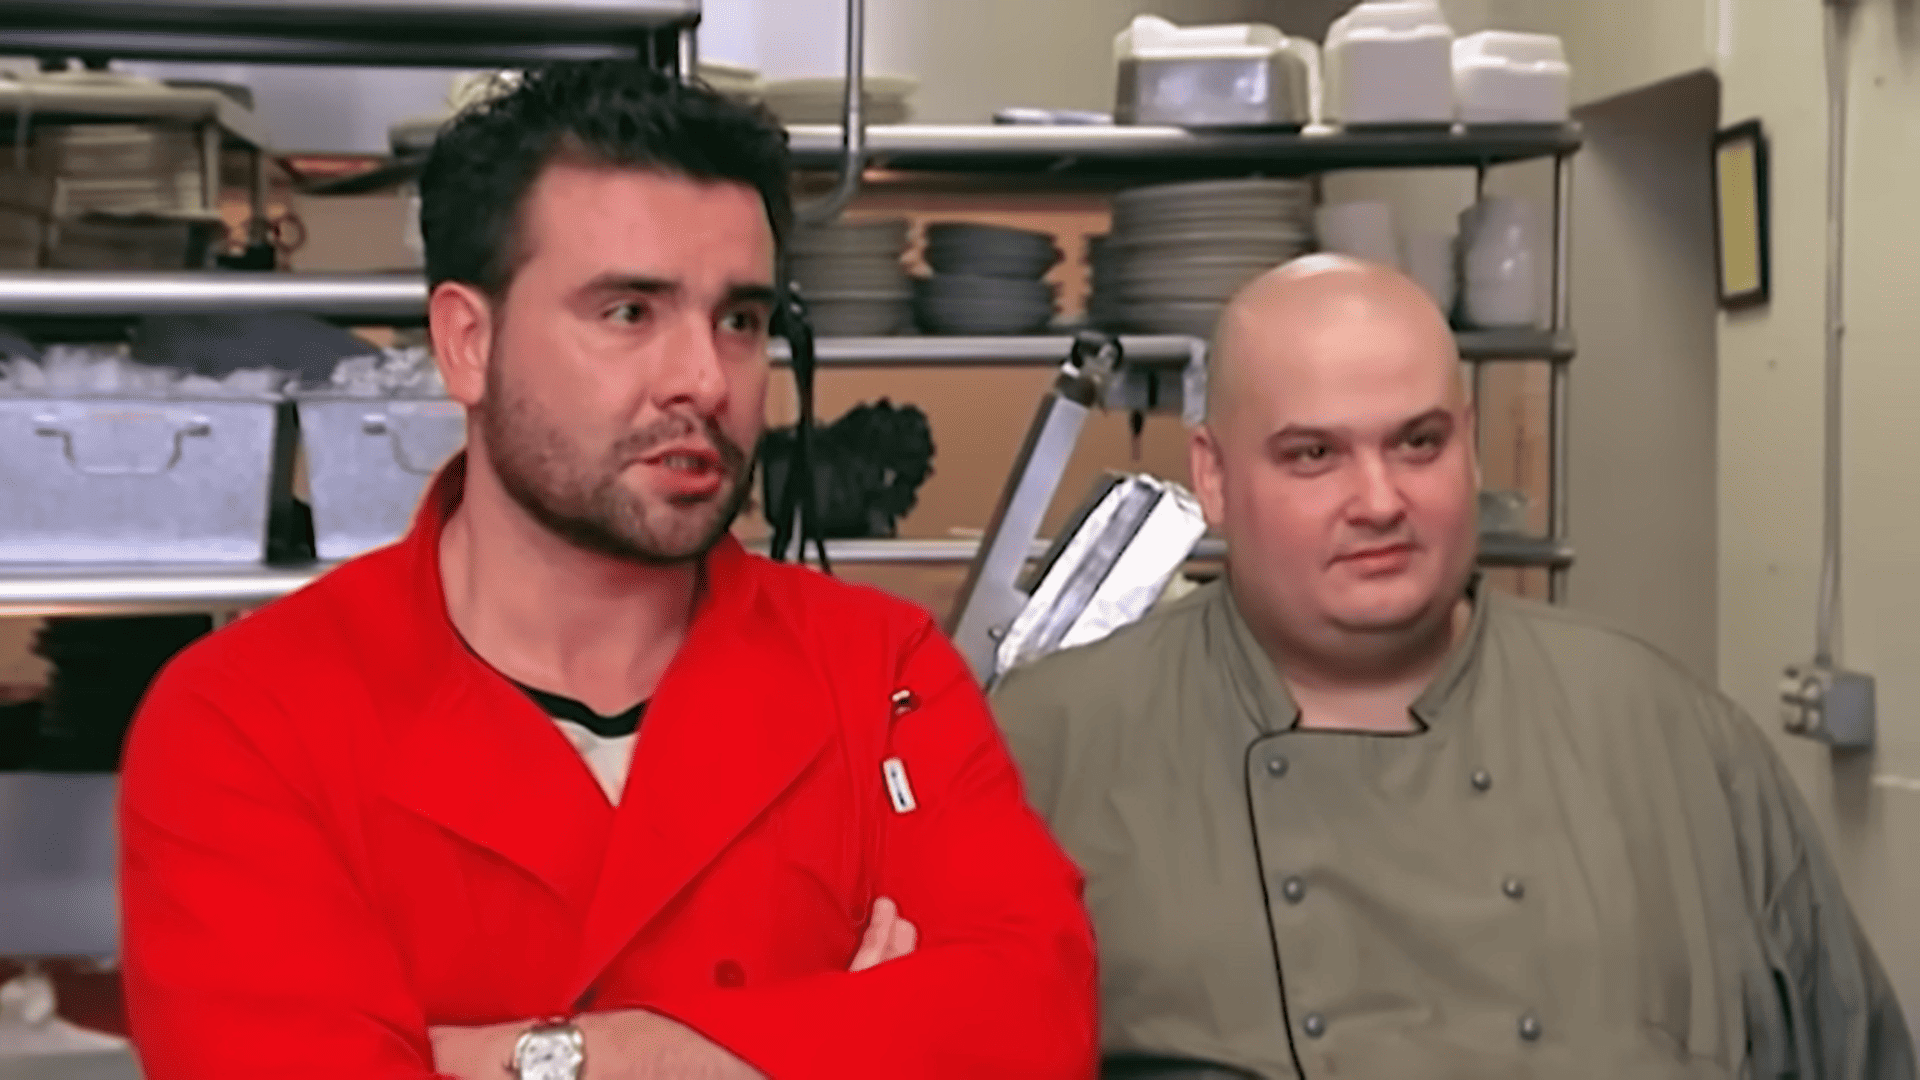 Co-owner/head chef Marcelo and chef Eduardo in this image from Studio Ramsay Global.